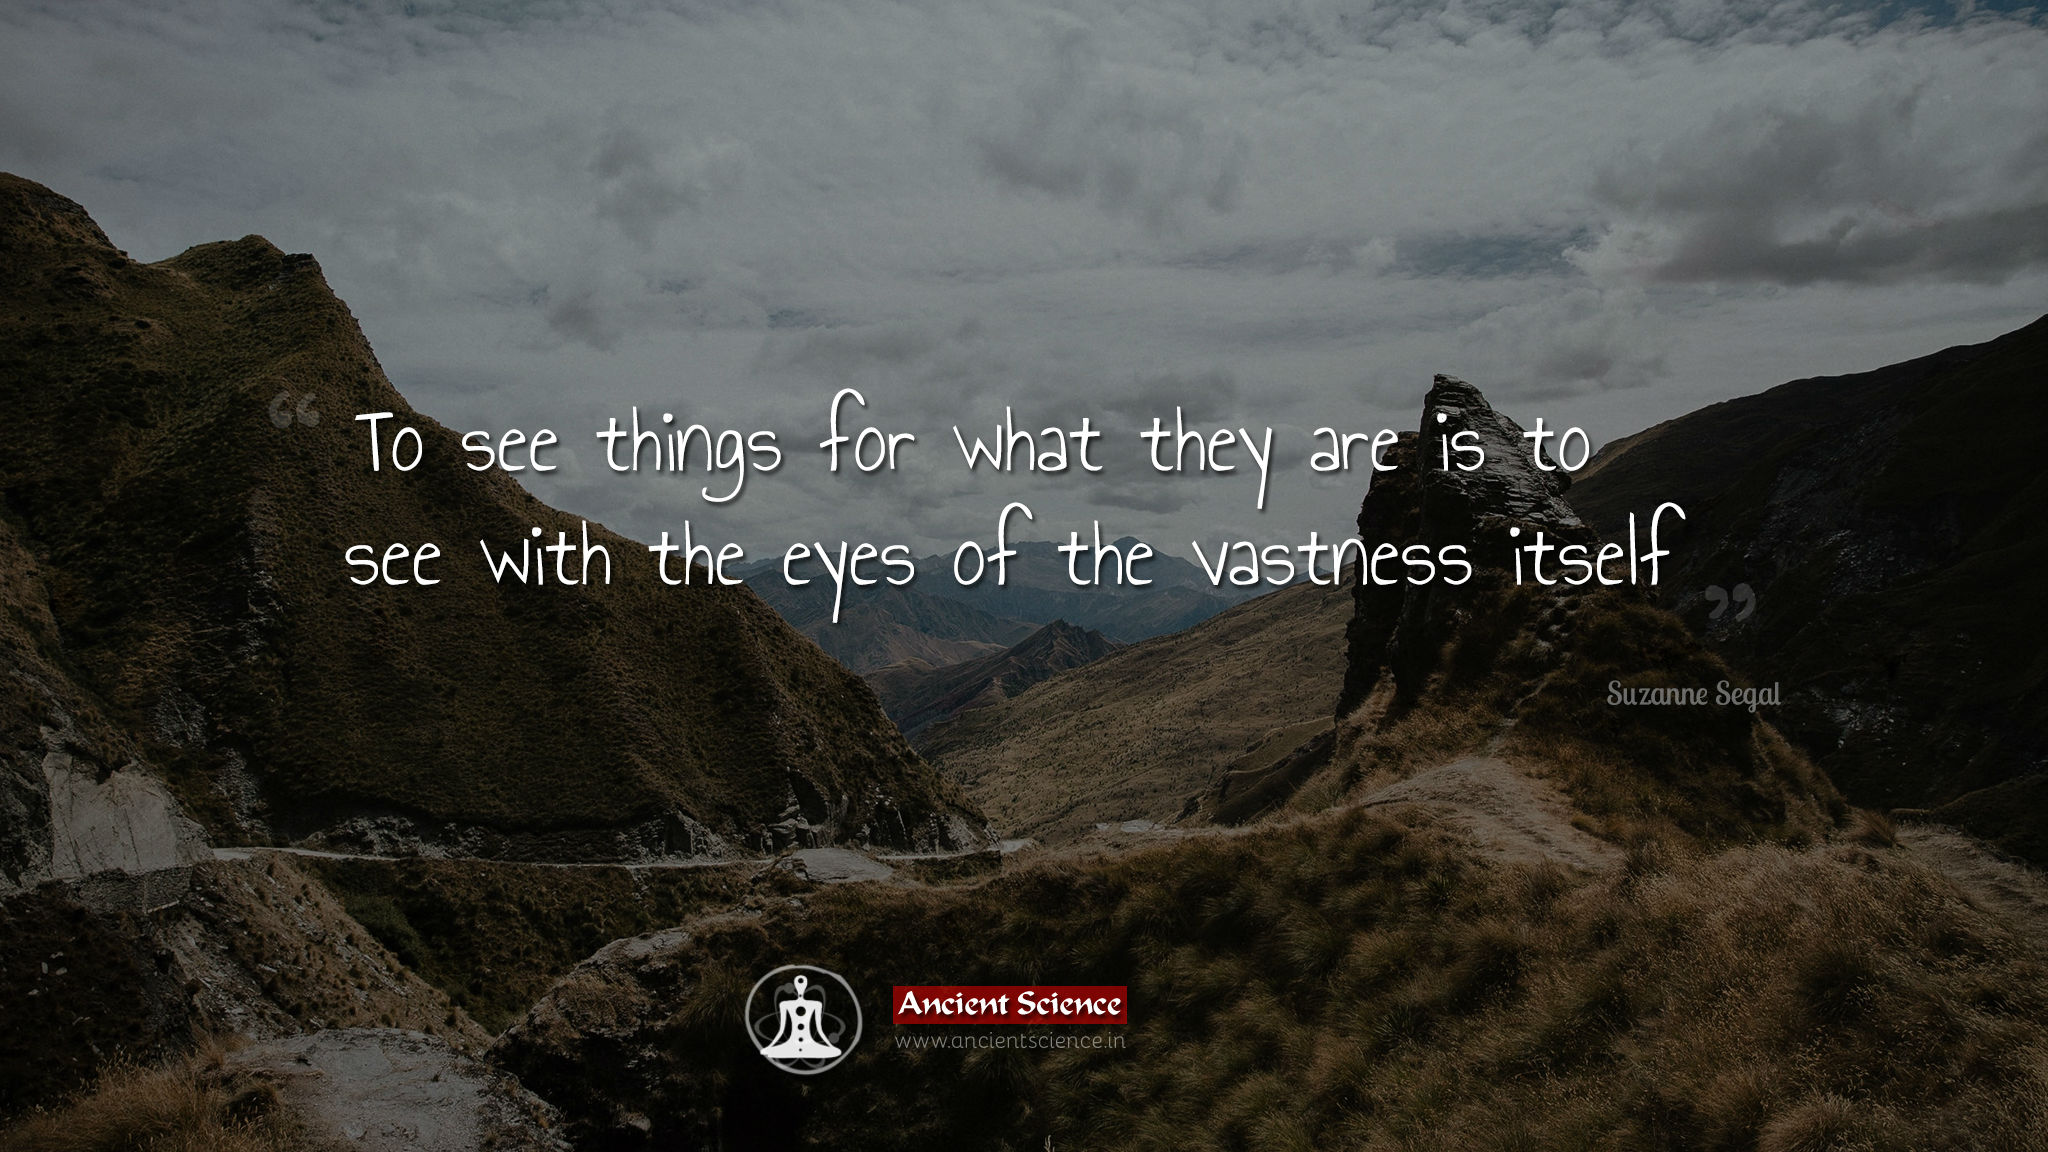 To see things for what they are is to see with the eyes of the vastness itself.